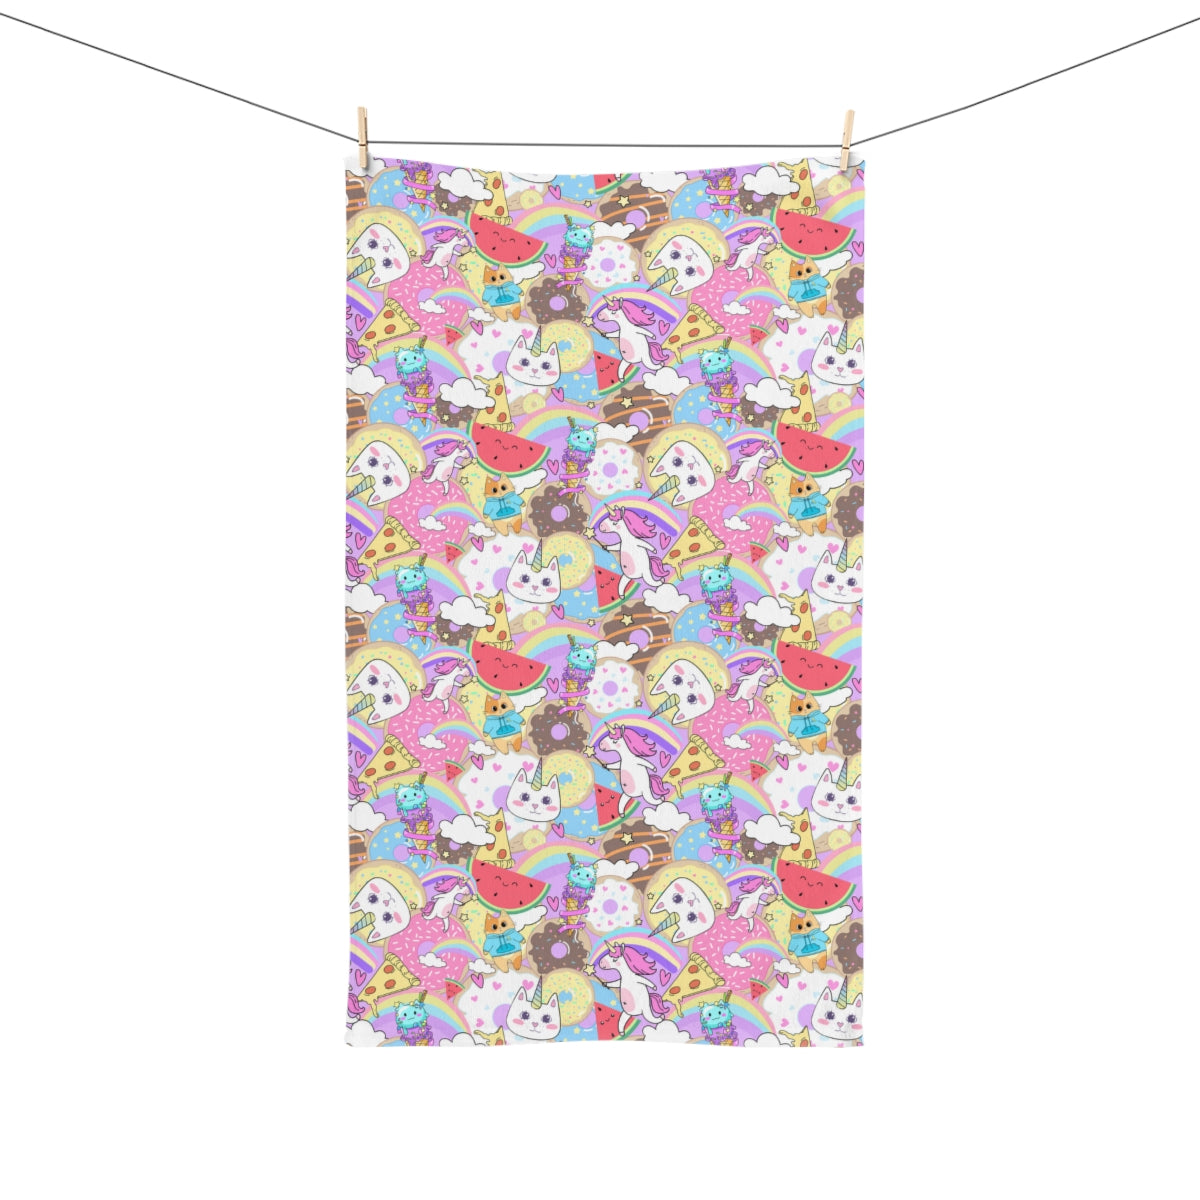 Unicorn Cats and Watermelons Hand Towel